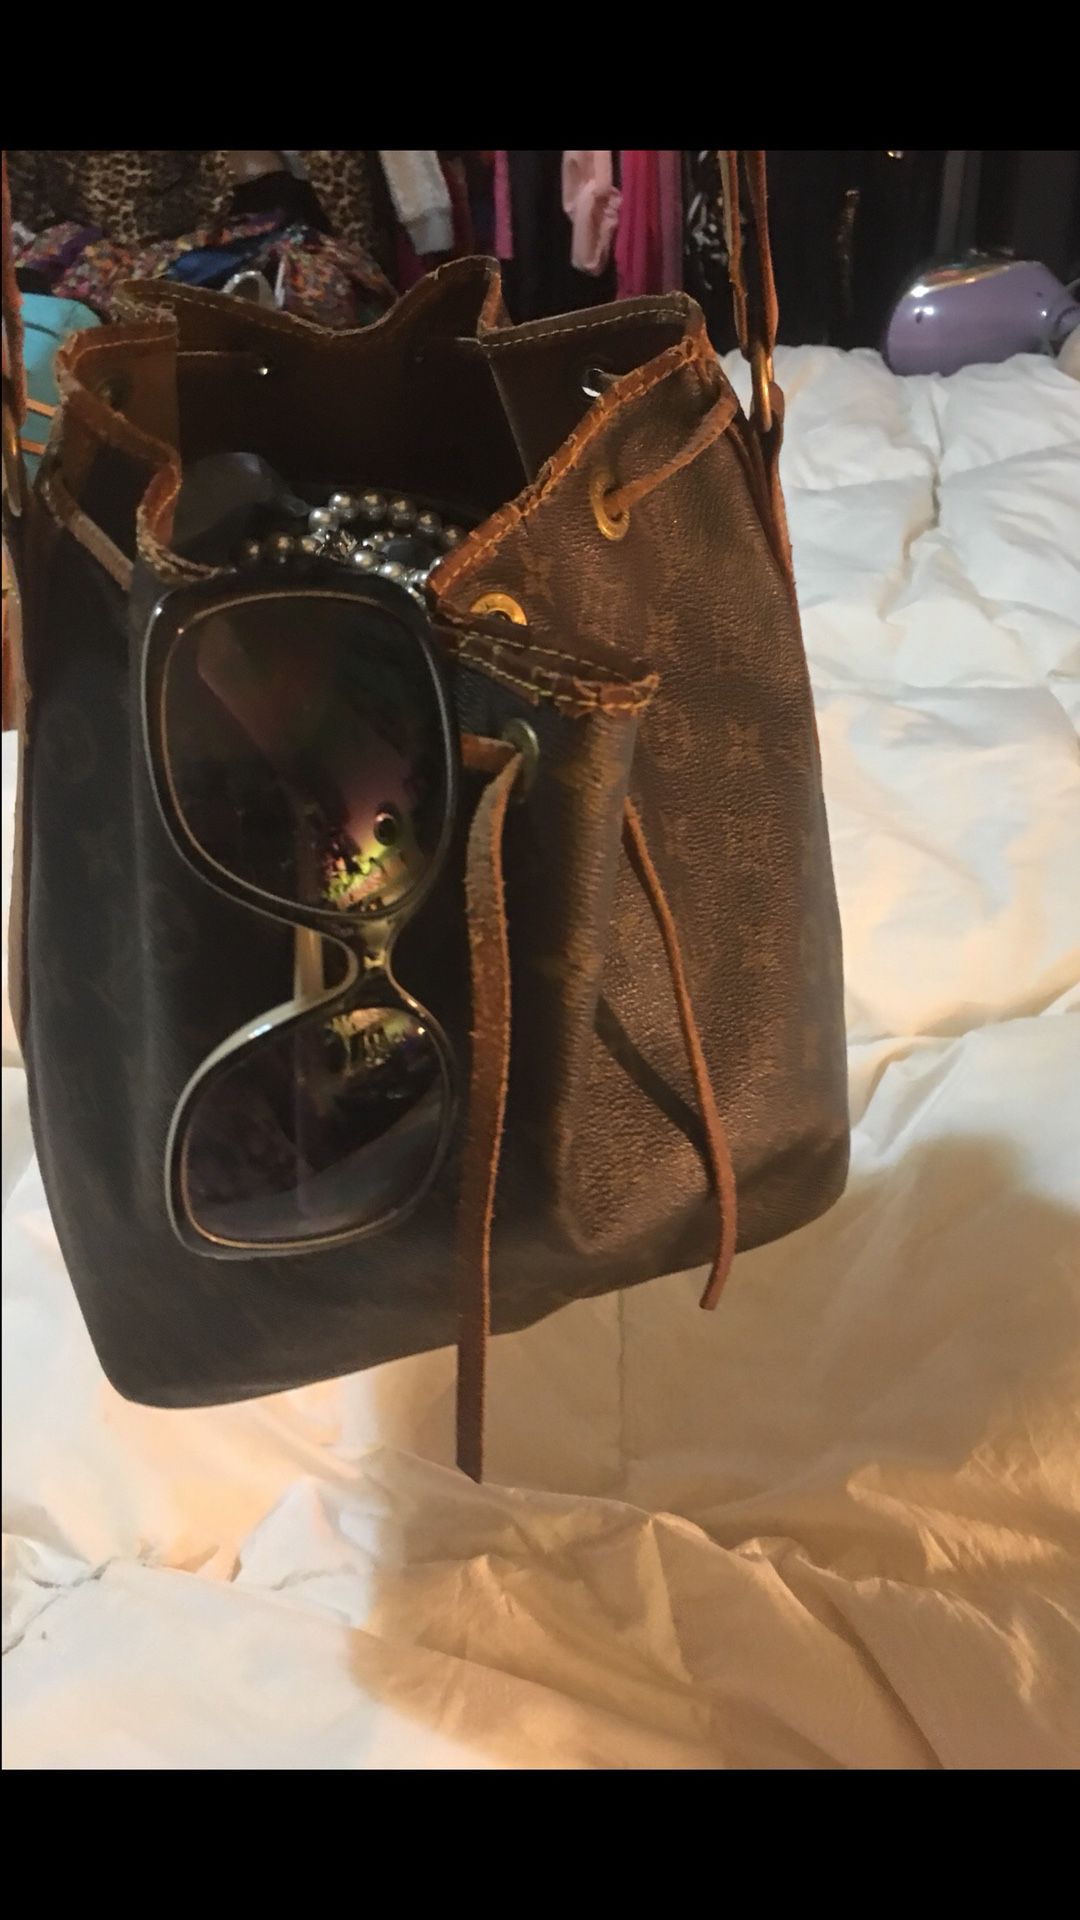 Lv Purse for Sale in Chelsea, MA - OfferUp